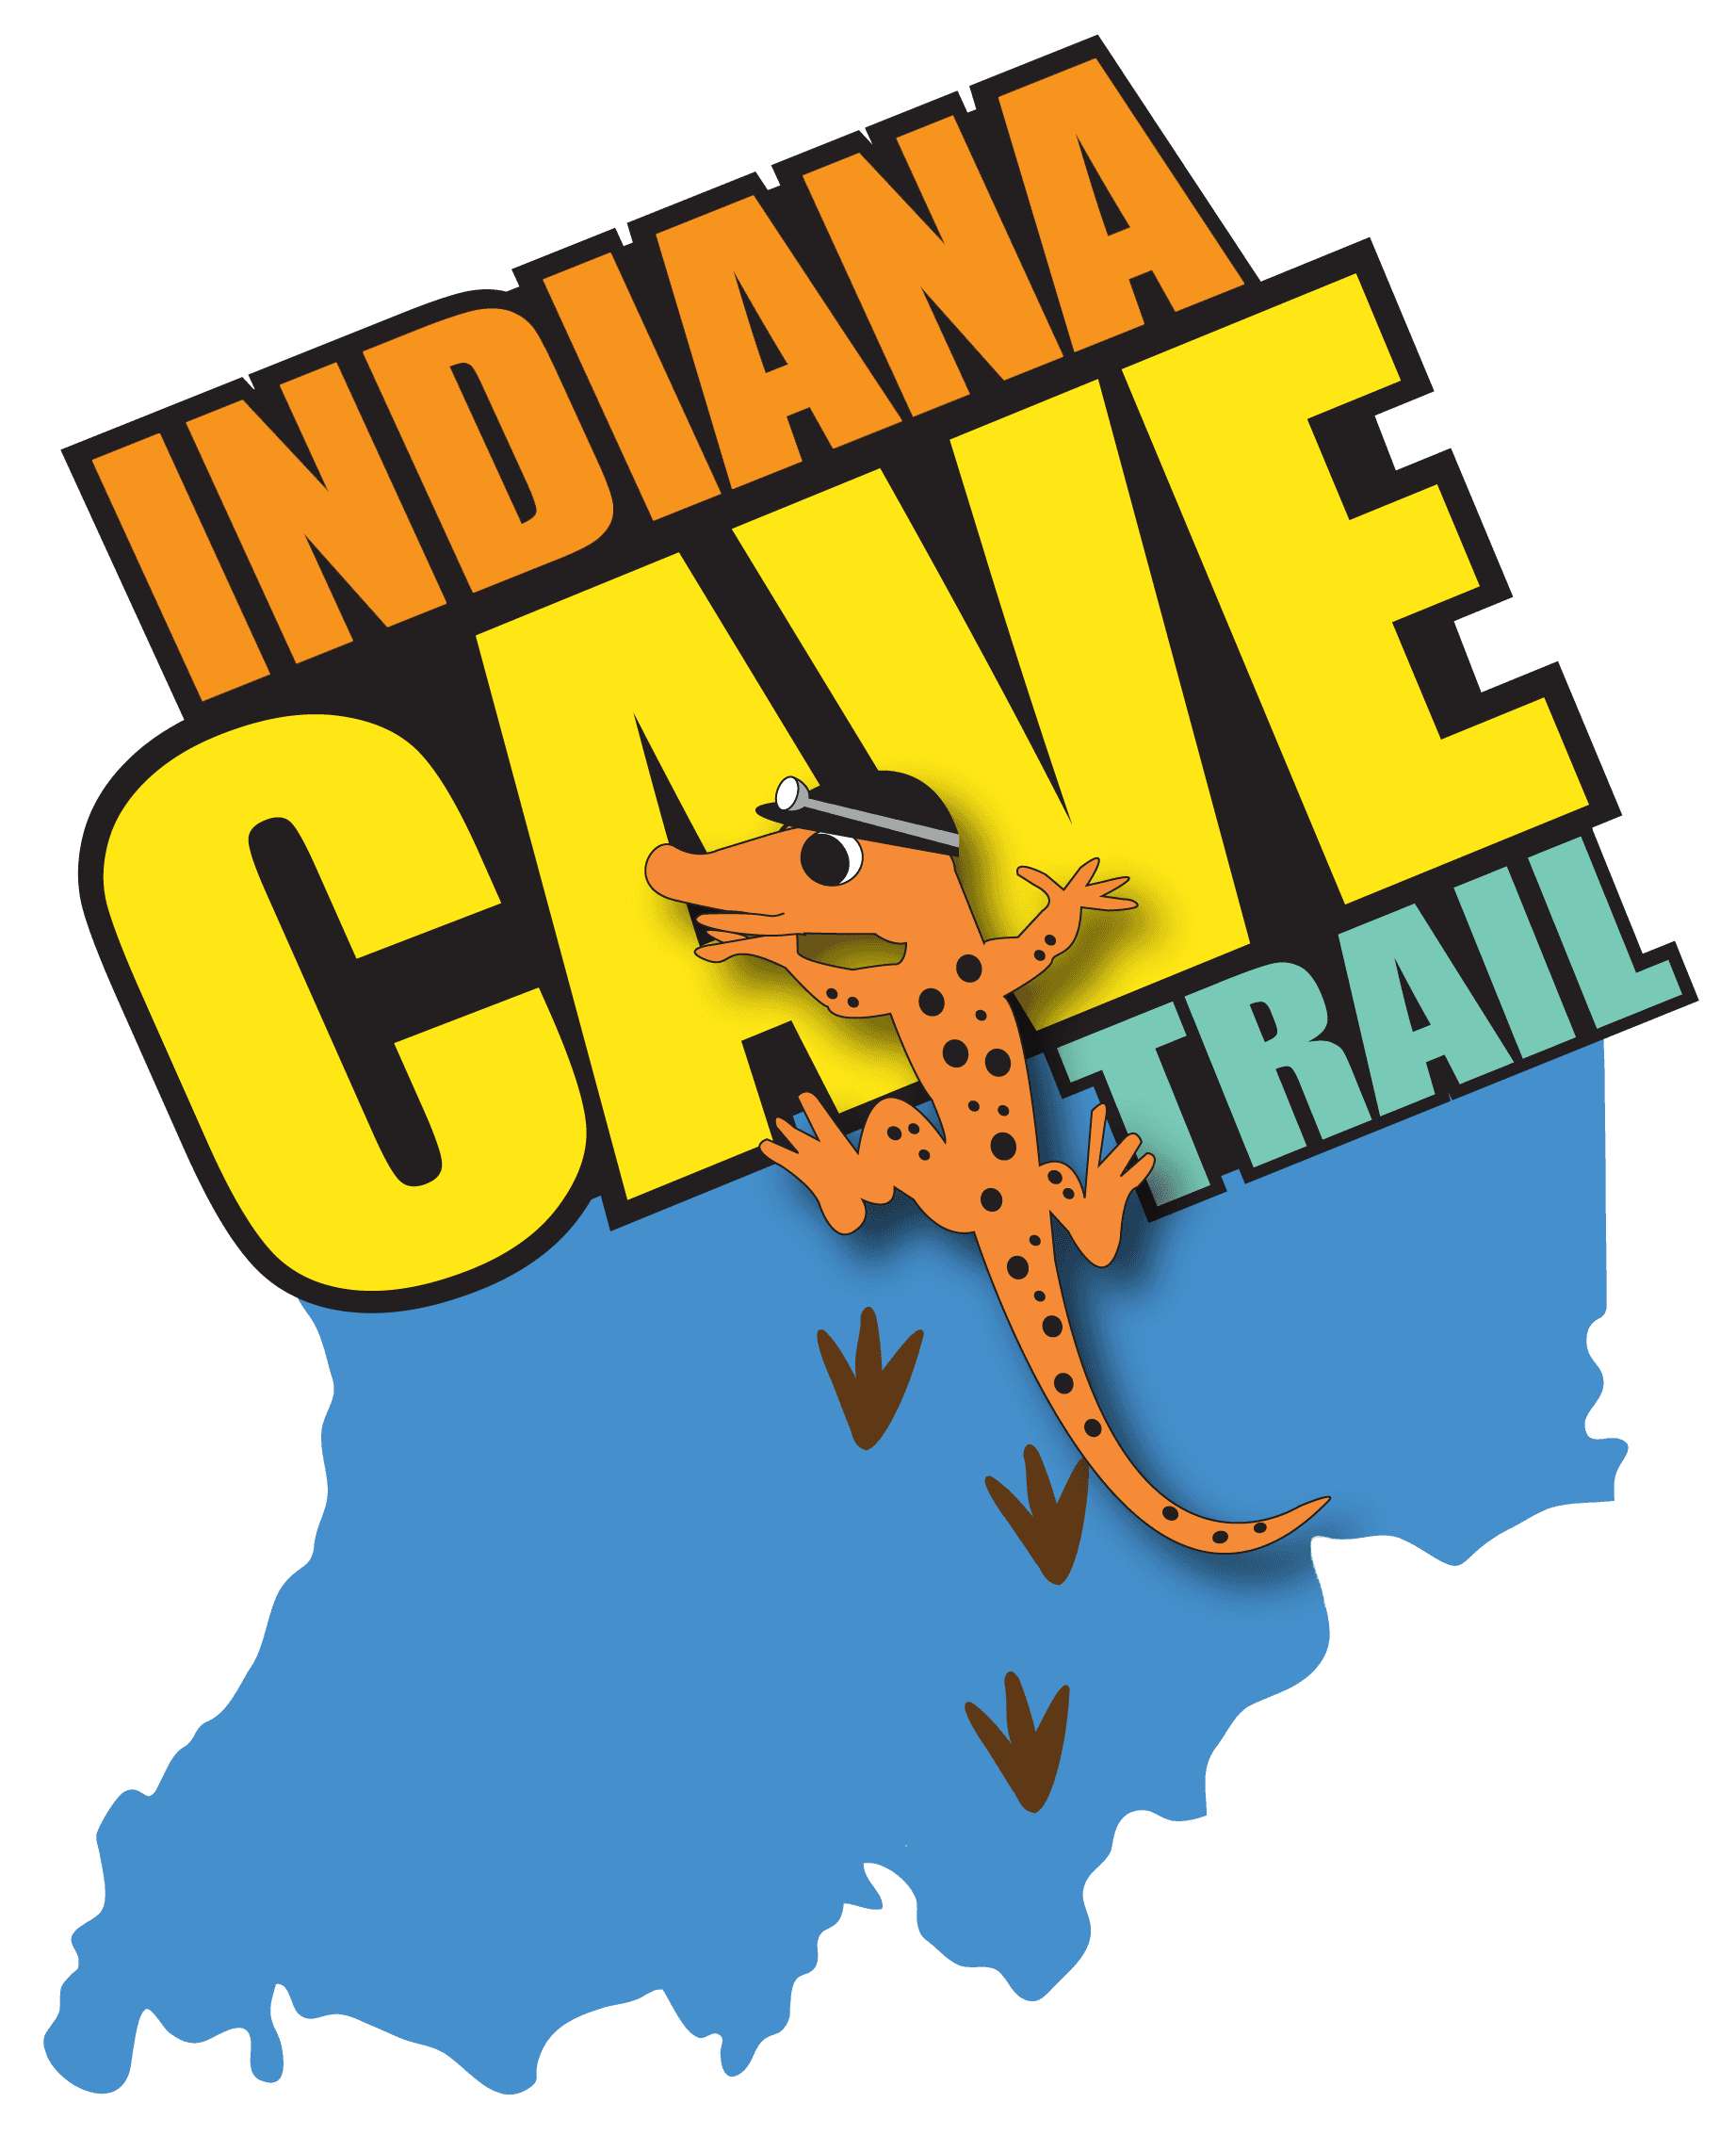 Indiana Cave Trail Logo